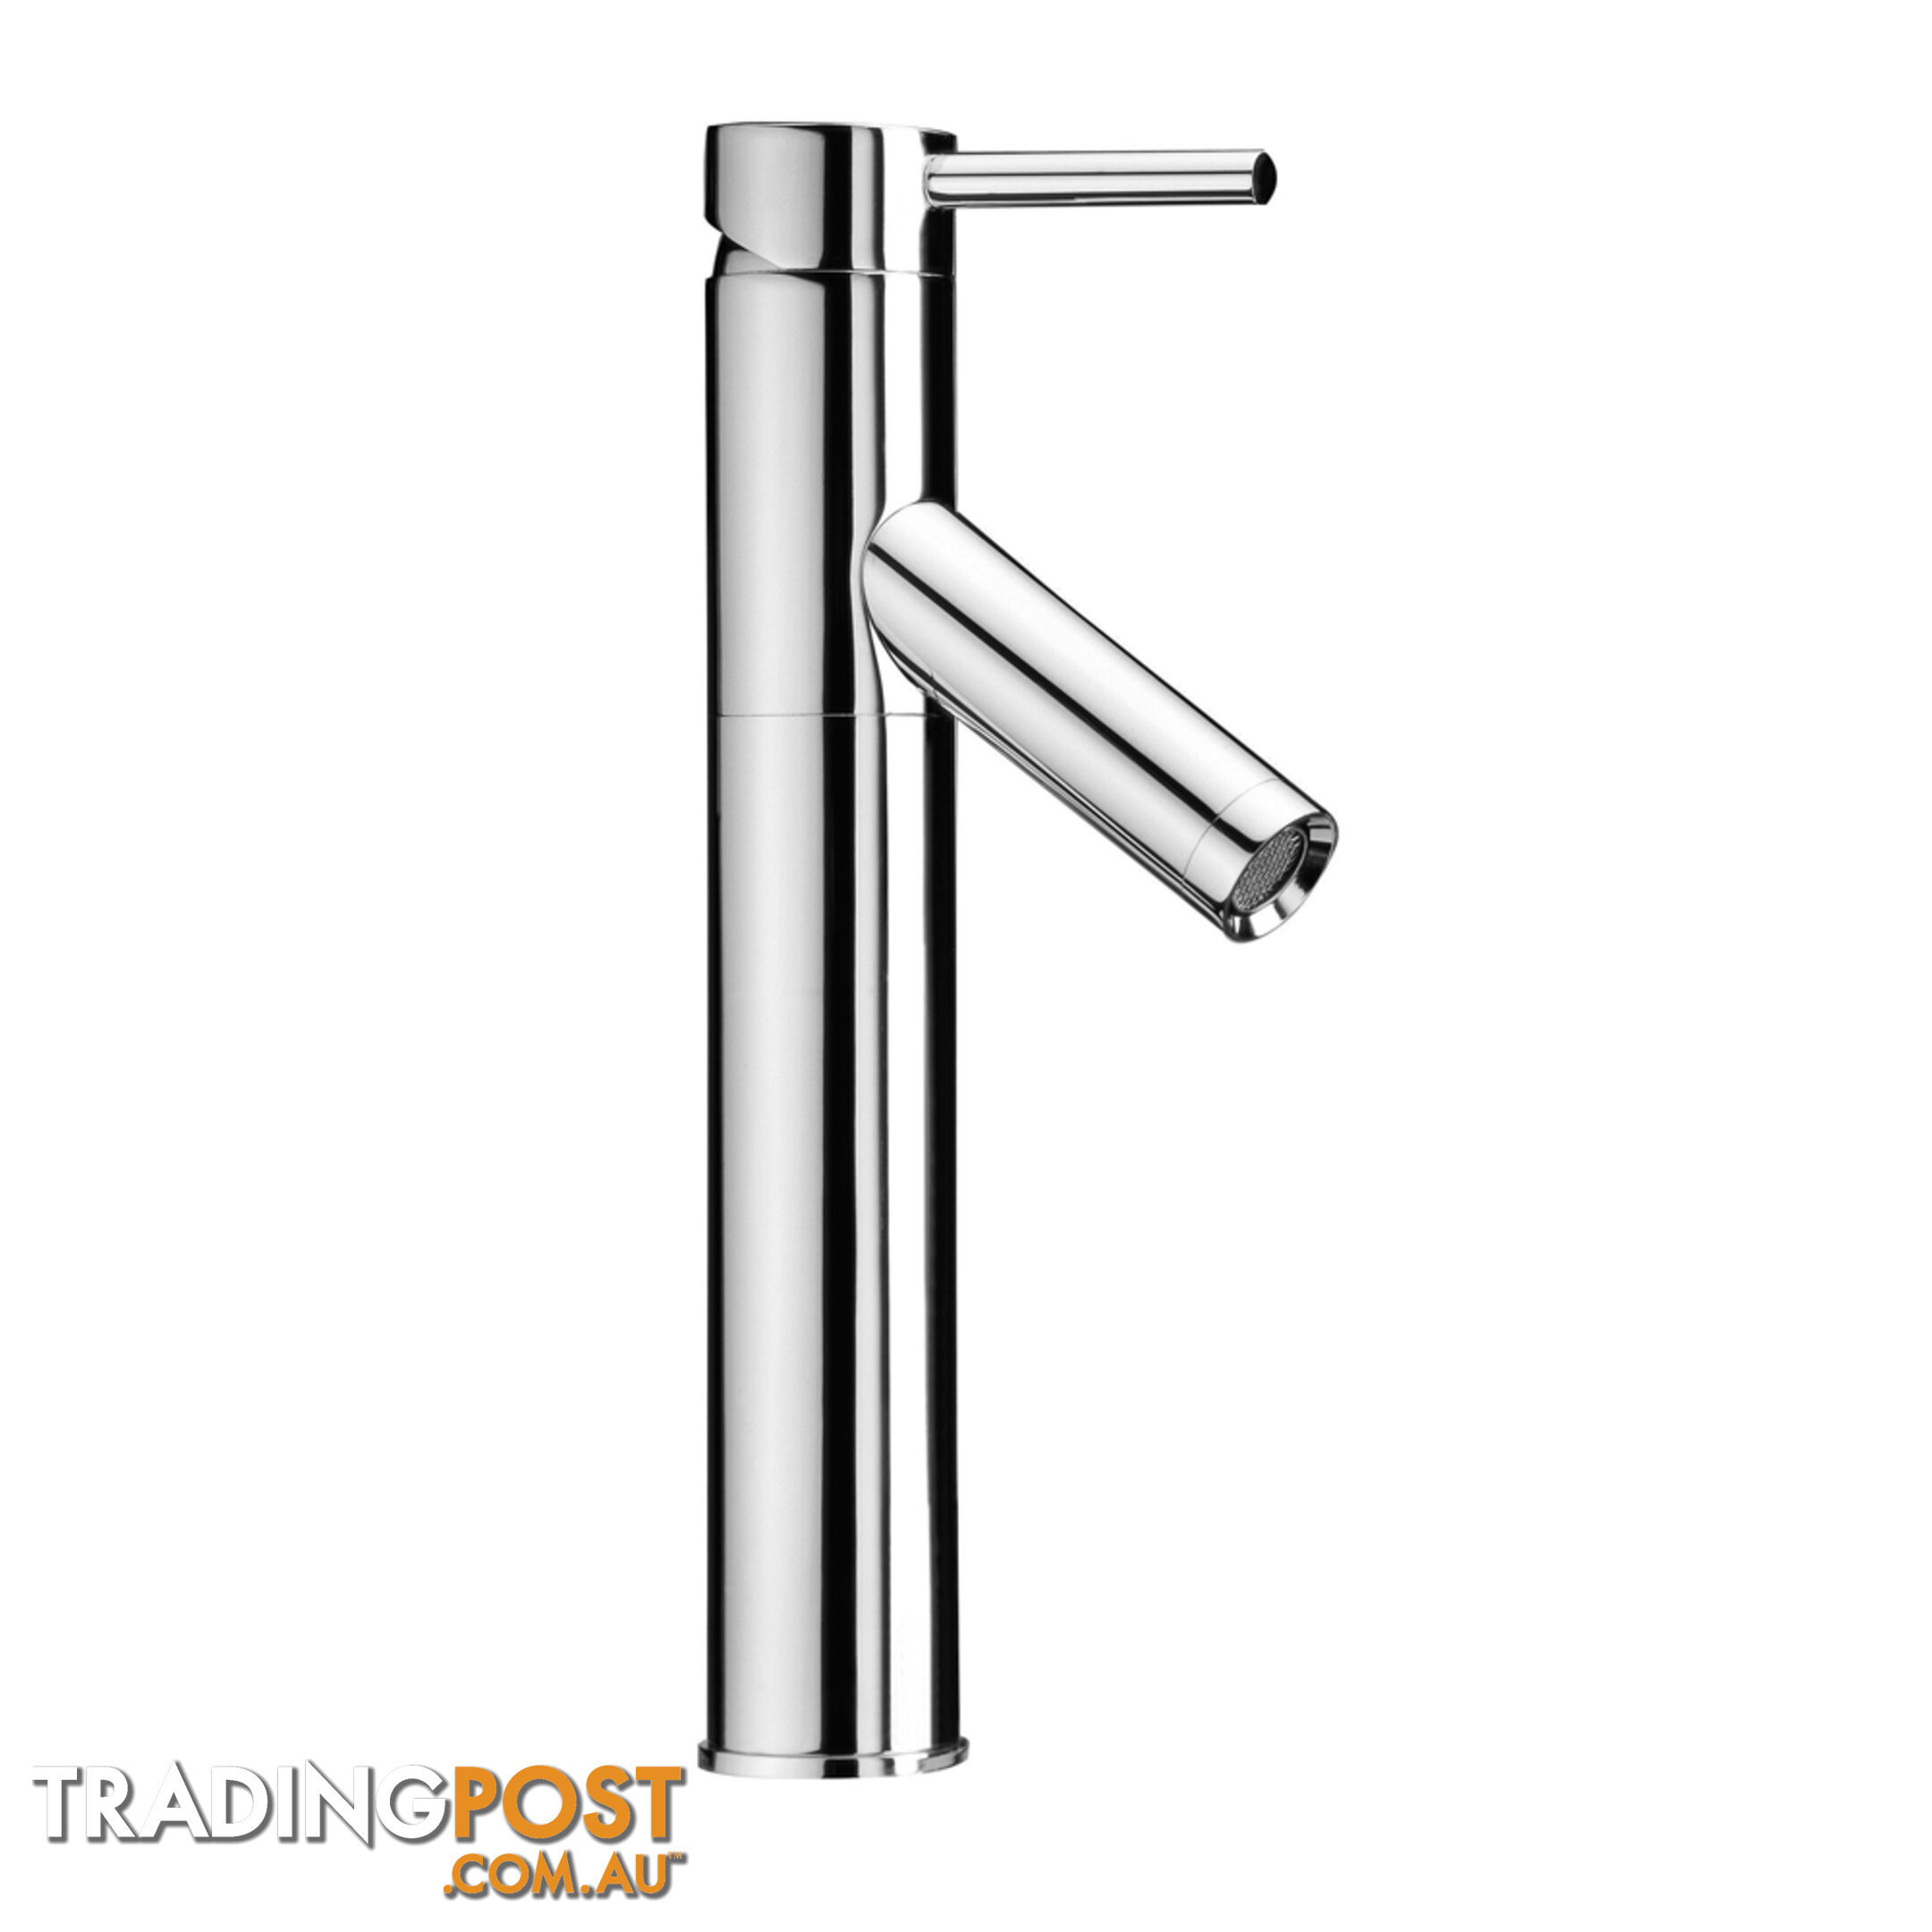 Kitchen Sink Faucet Flick Vanity Basin Tall Mixer Tap Bathroom Spout Brass Round